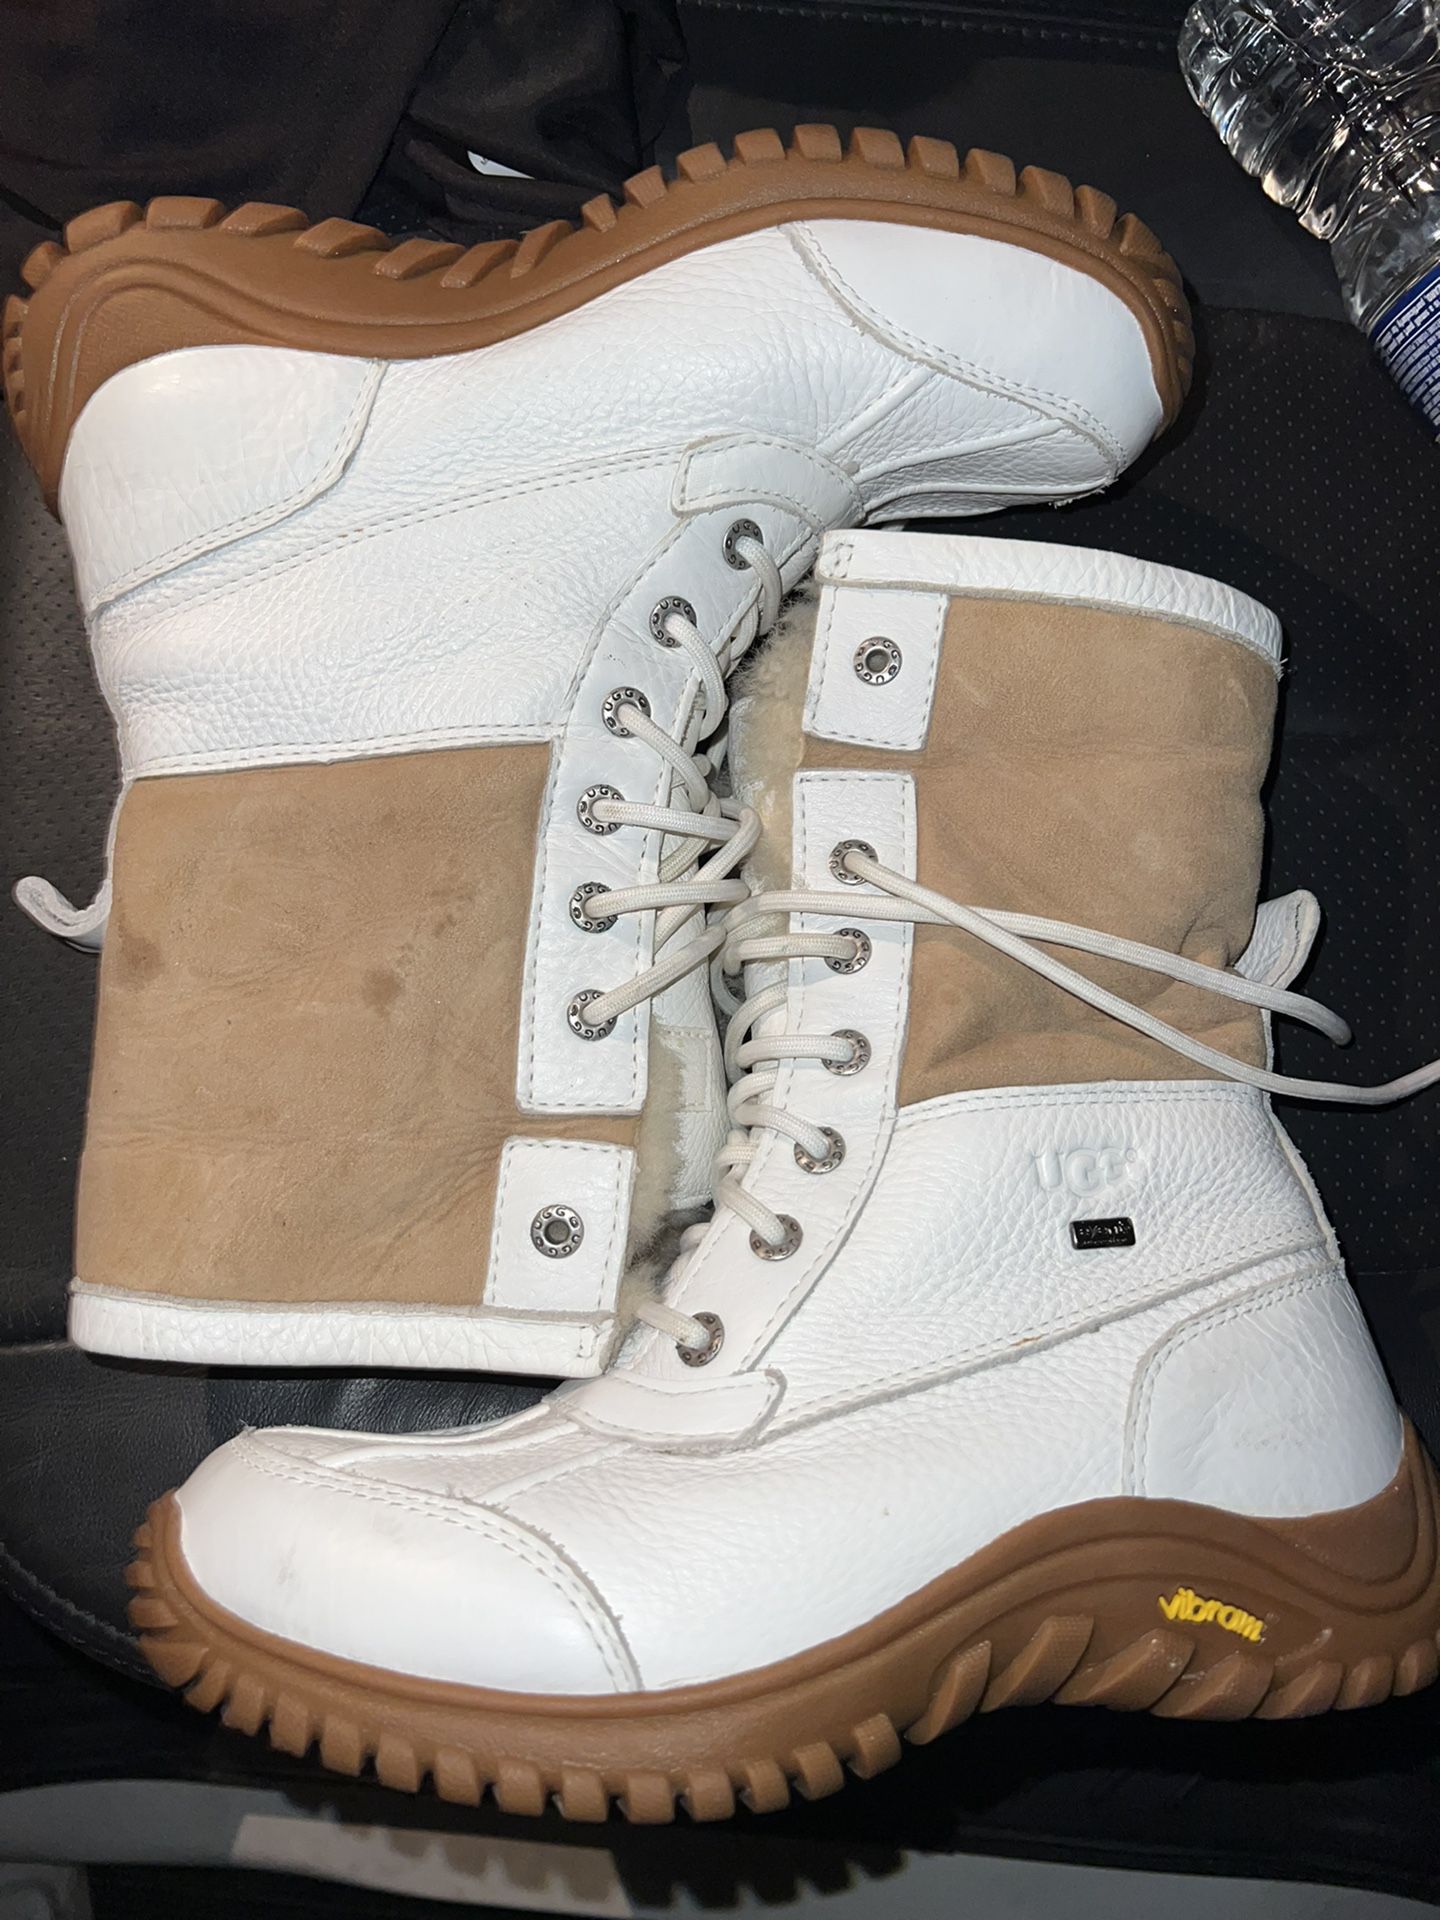 Womens Ugg Boots 